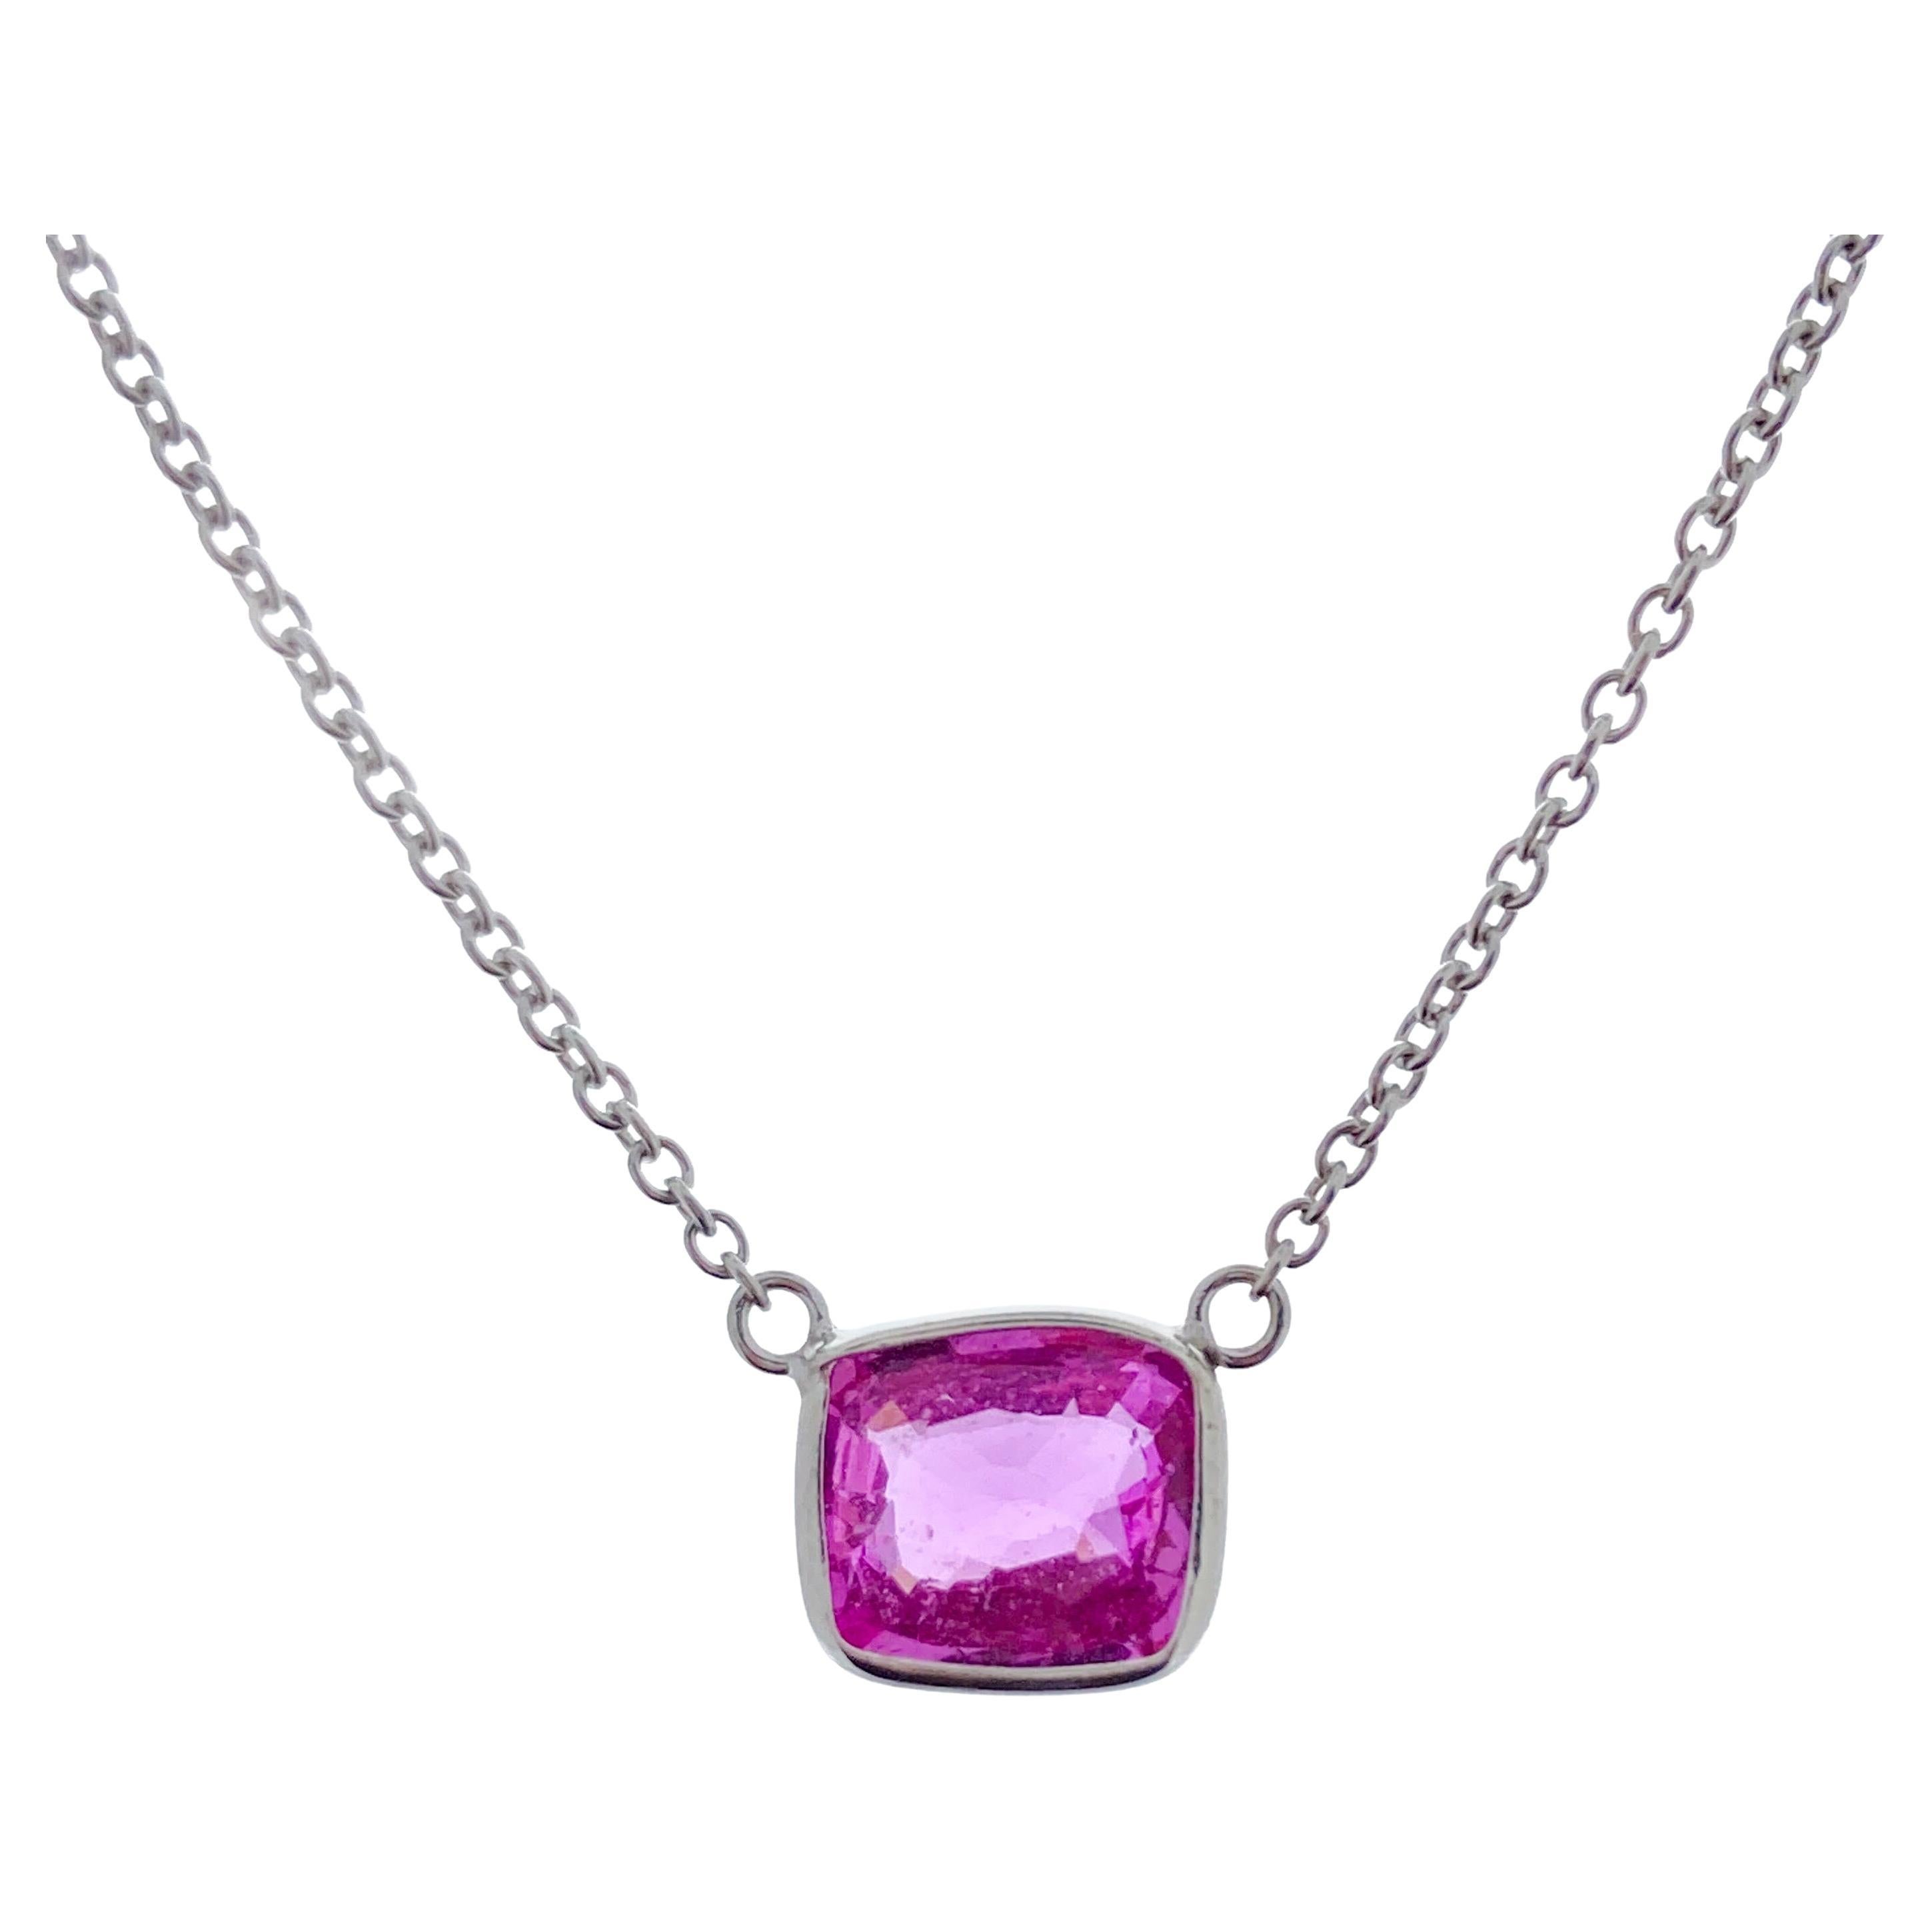 1.60 Carat Cushion Pink Sapphire Fashion Necklaces In 14K White Gold  For Sale